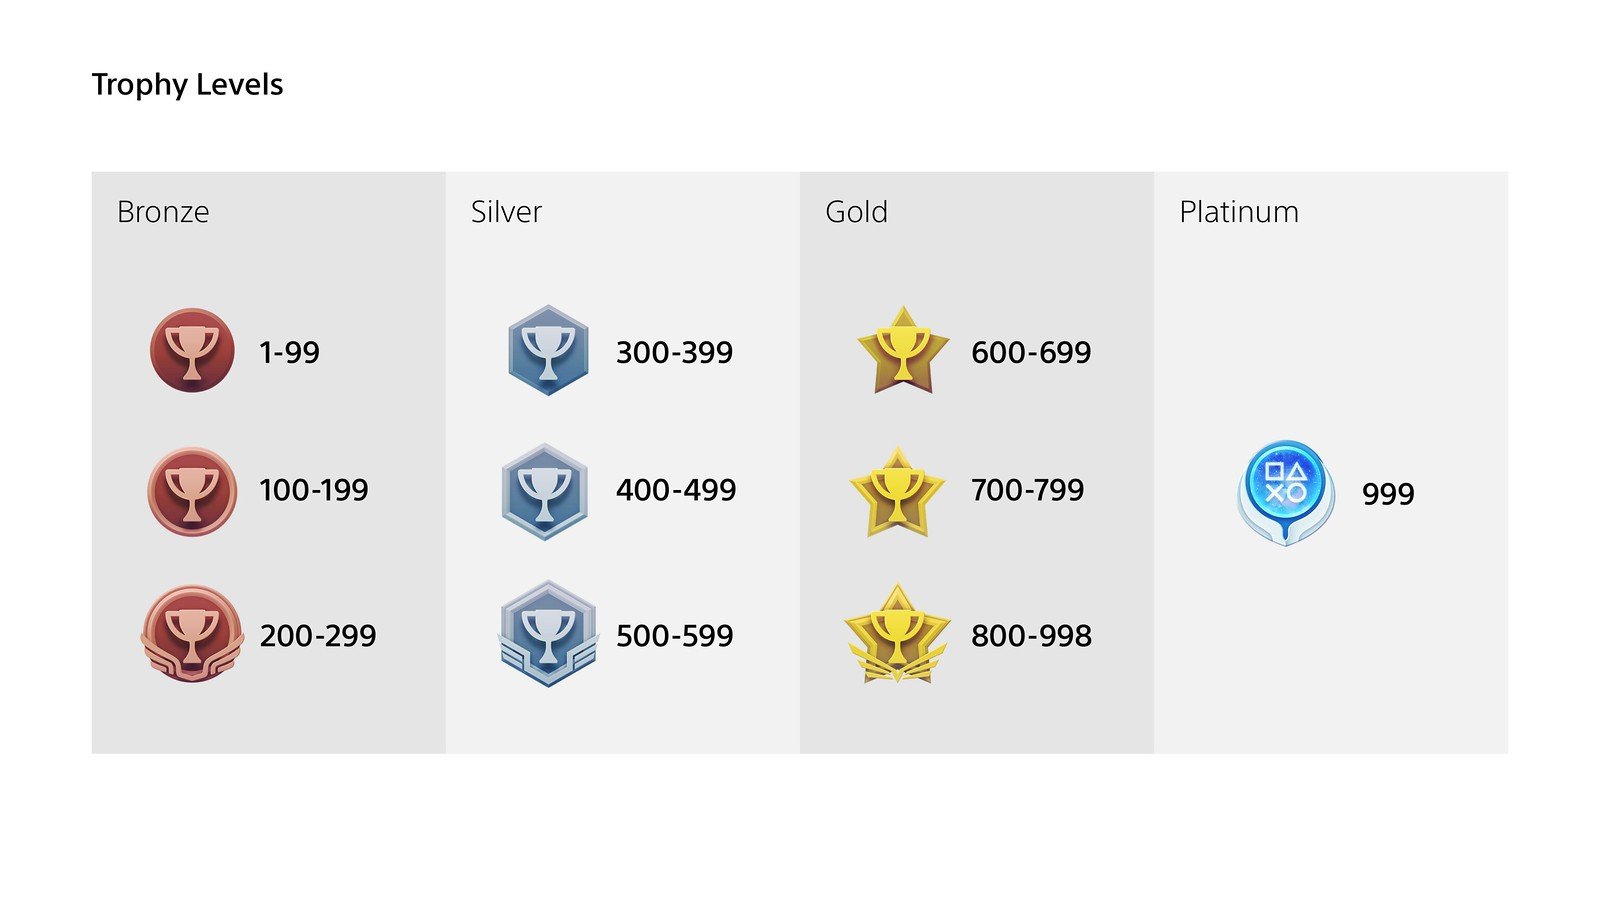 SHOULD YOU PLATINUM GOTHAM KNIGHTS ON PS4 / PS5? - TROPHY GUIDE